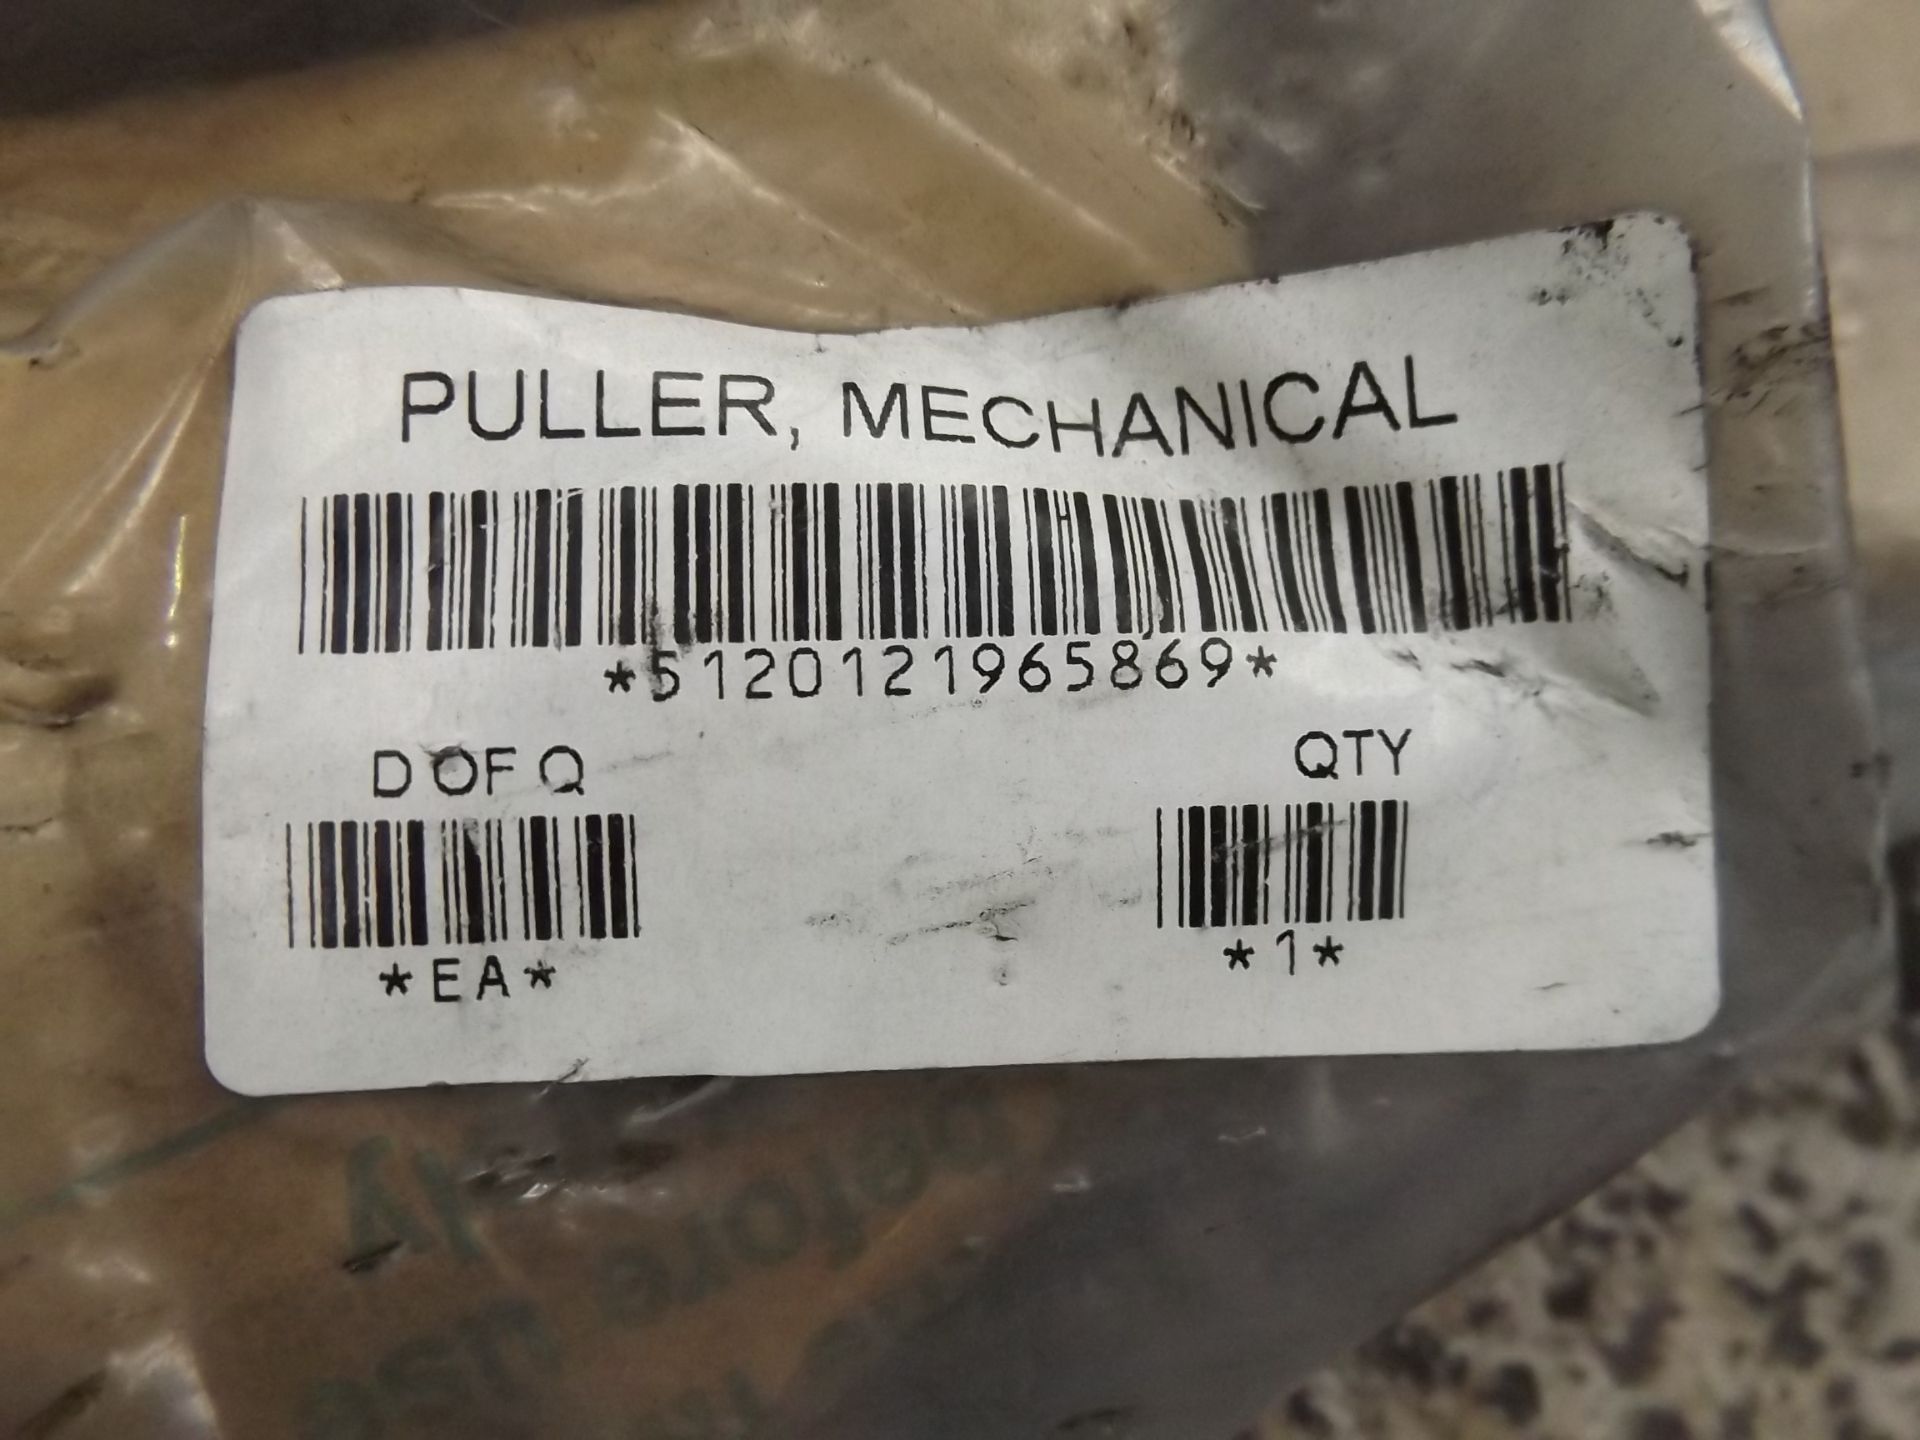 10 x VW / Audi Injection Pump Sprocket Pullers P/No 3032 - Image 5 of 6